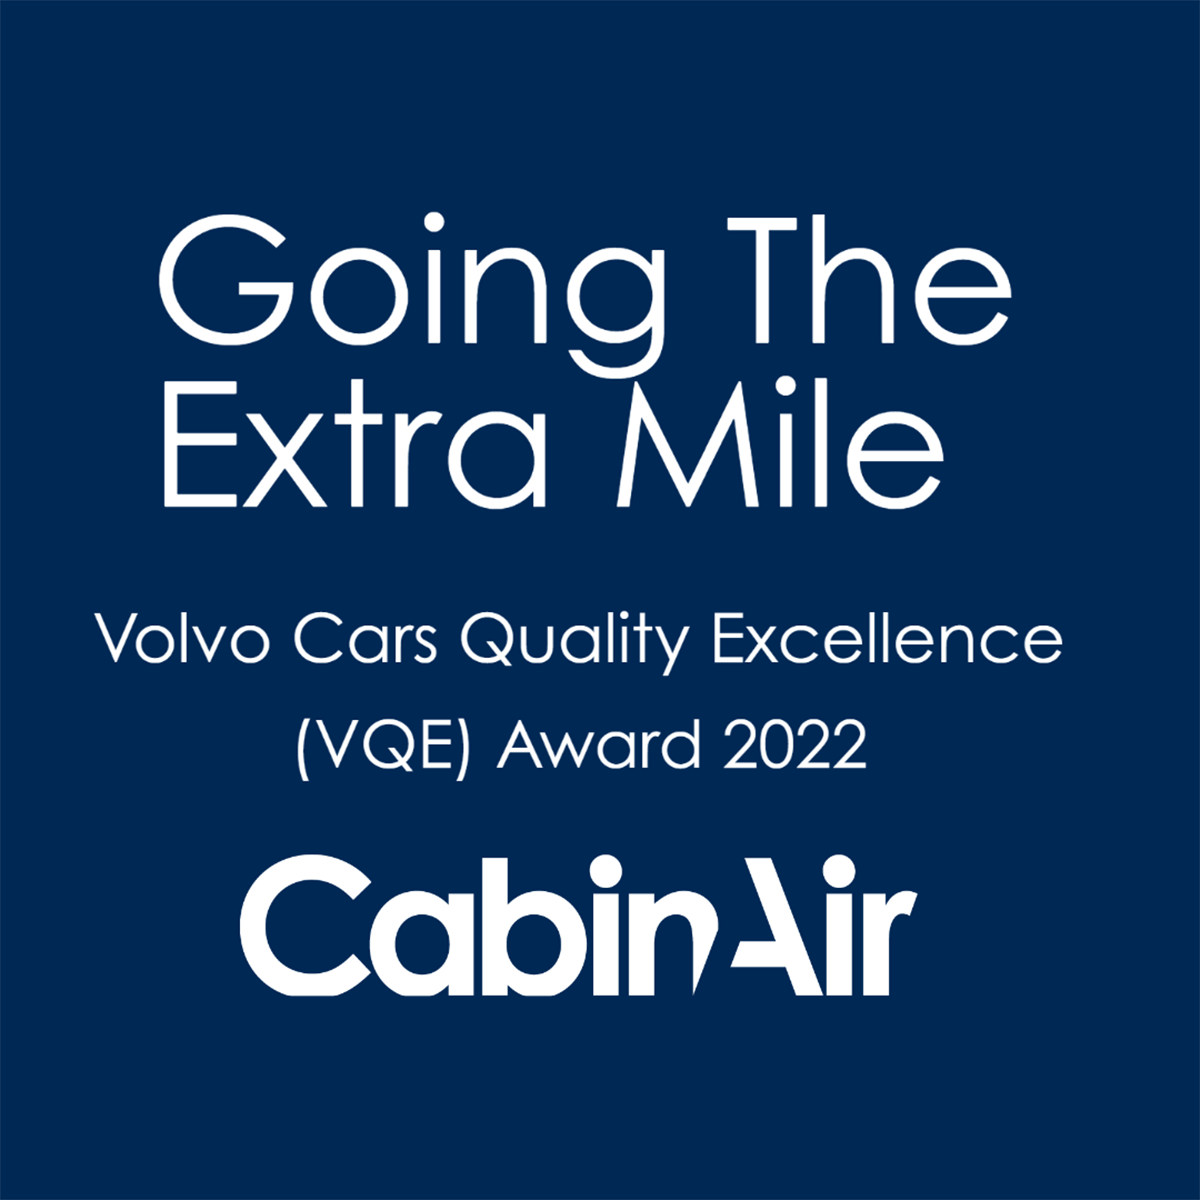 CabinAir receives Volvo Cars Quality Excellence Award